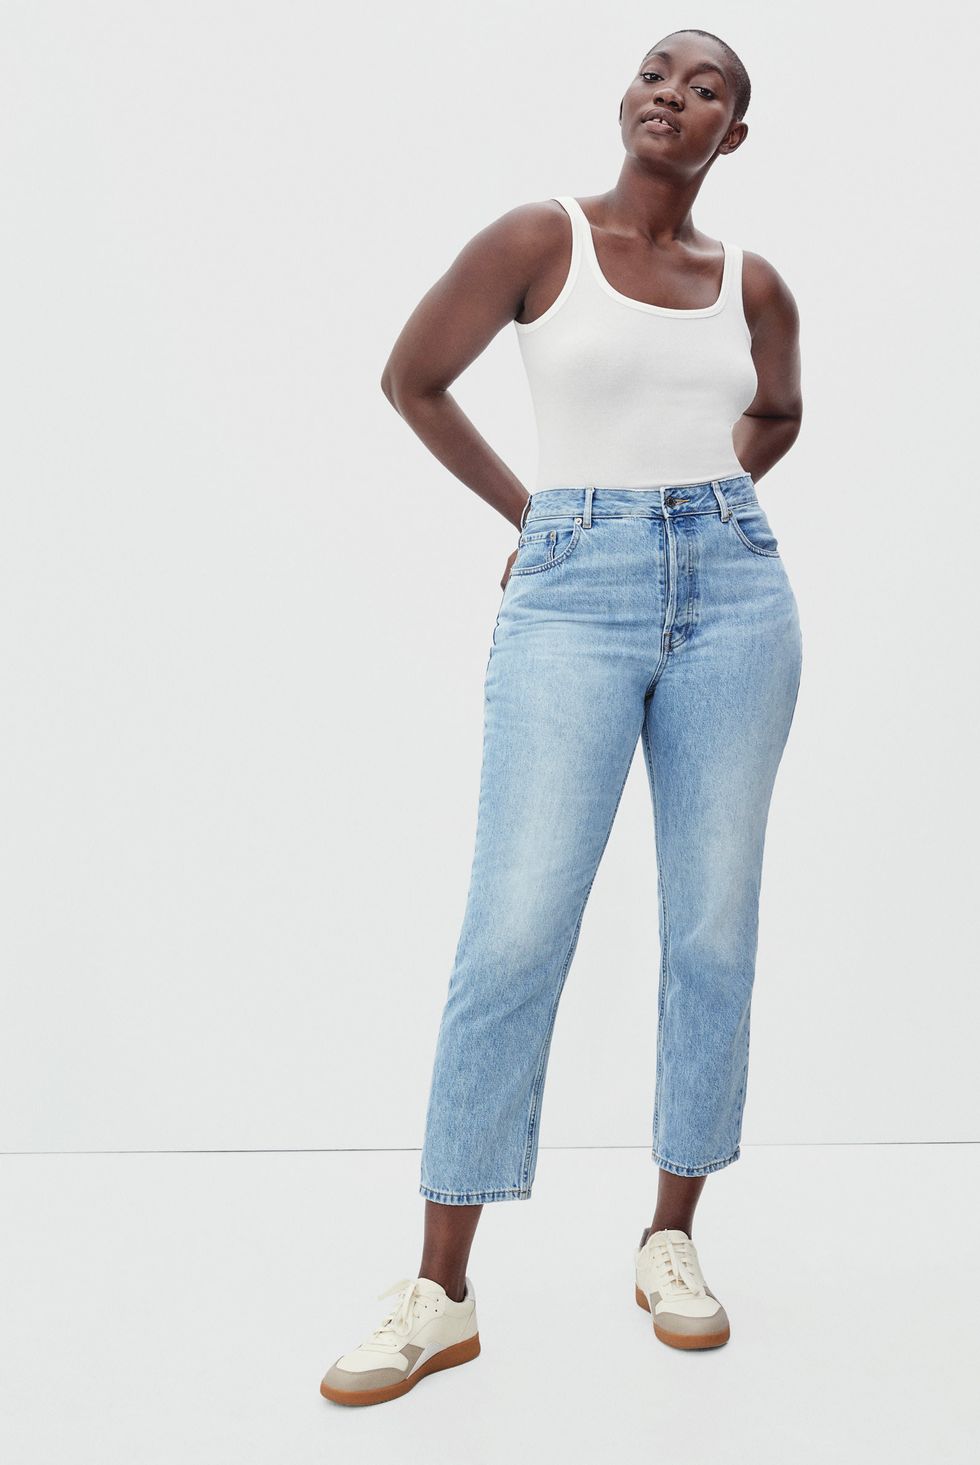 Curvy Jeans - Jeans for Curvy Women